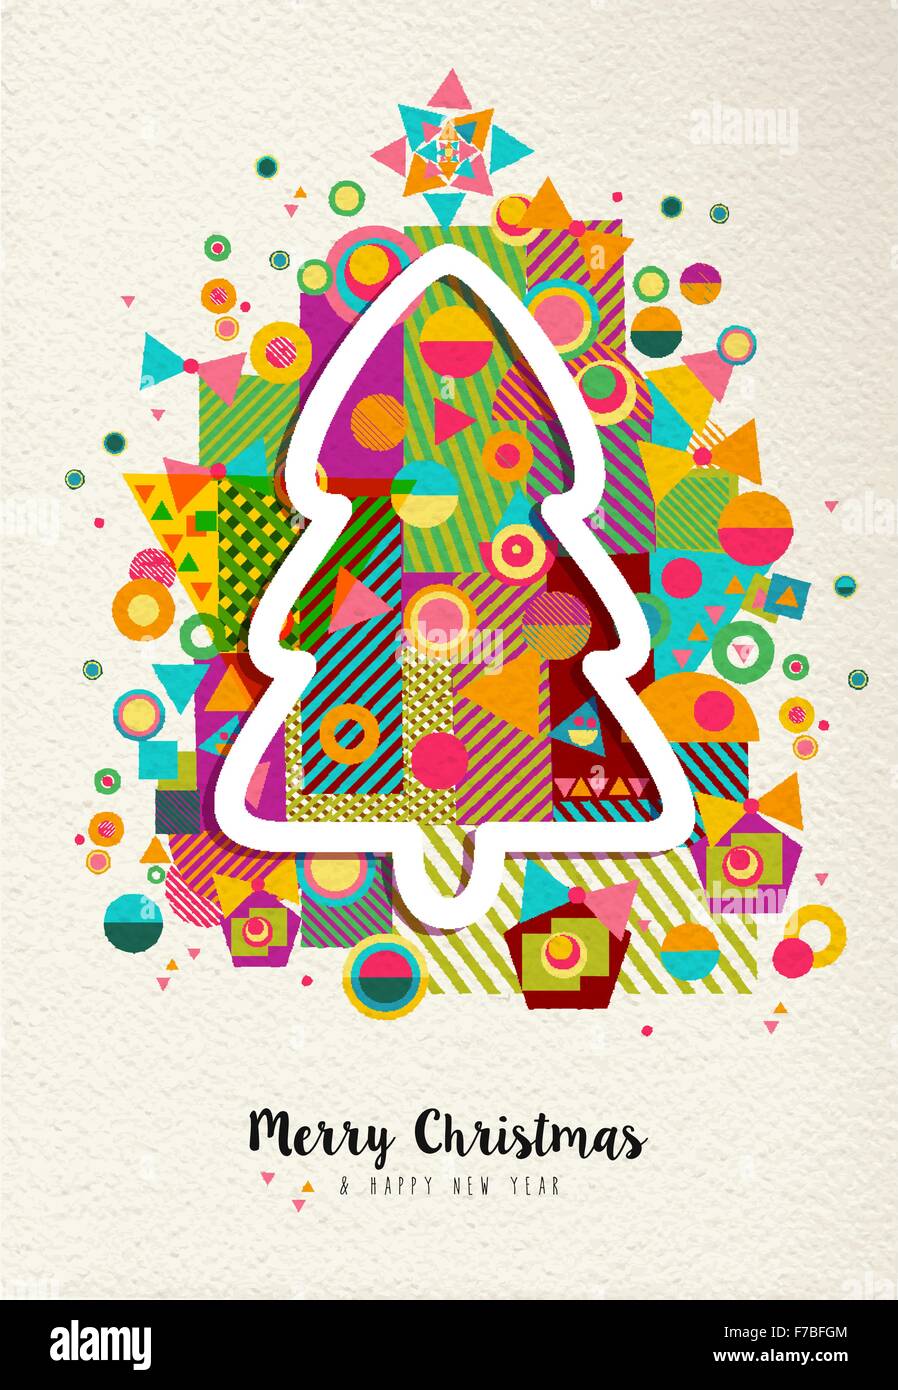 Merry Christmas Happy New Year design with colorful geometry fun shapes and xmas pine tree outline. Ideal for holiday season Stock Vector